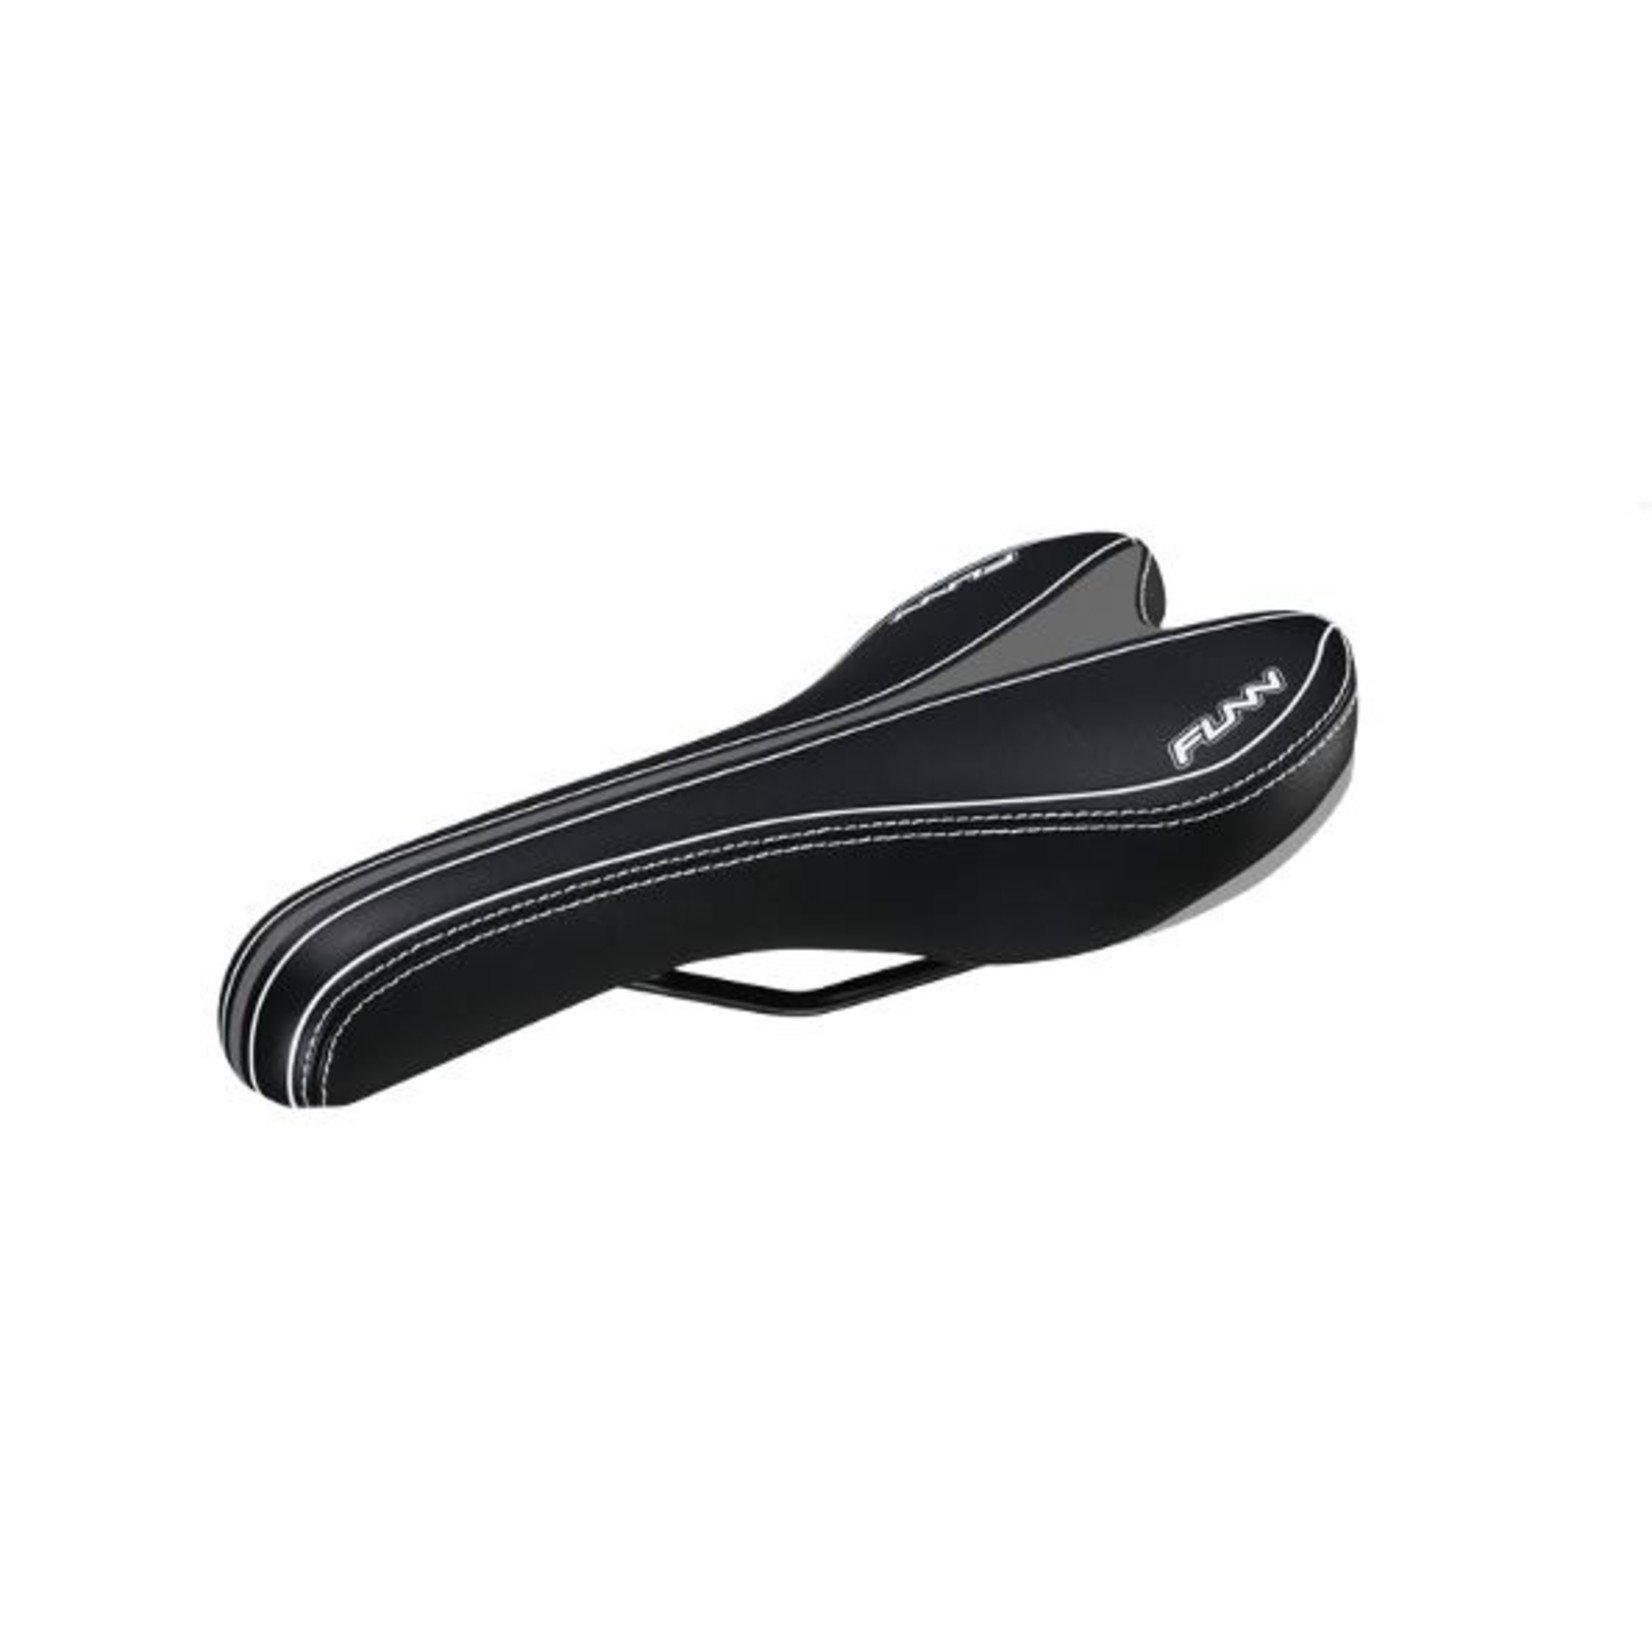 FUNN Funn Bicycle Saddle - Launch Ii - Water Resistant Pvc Resistant Base - Black